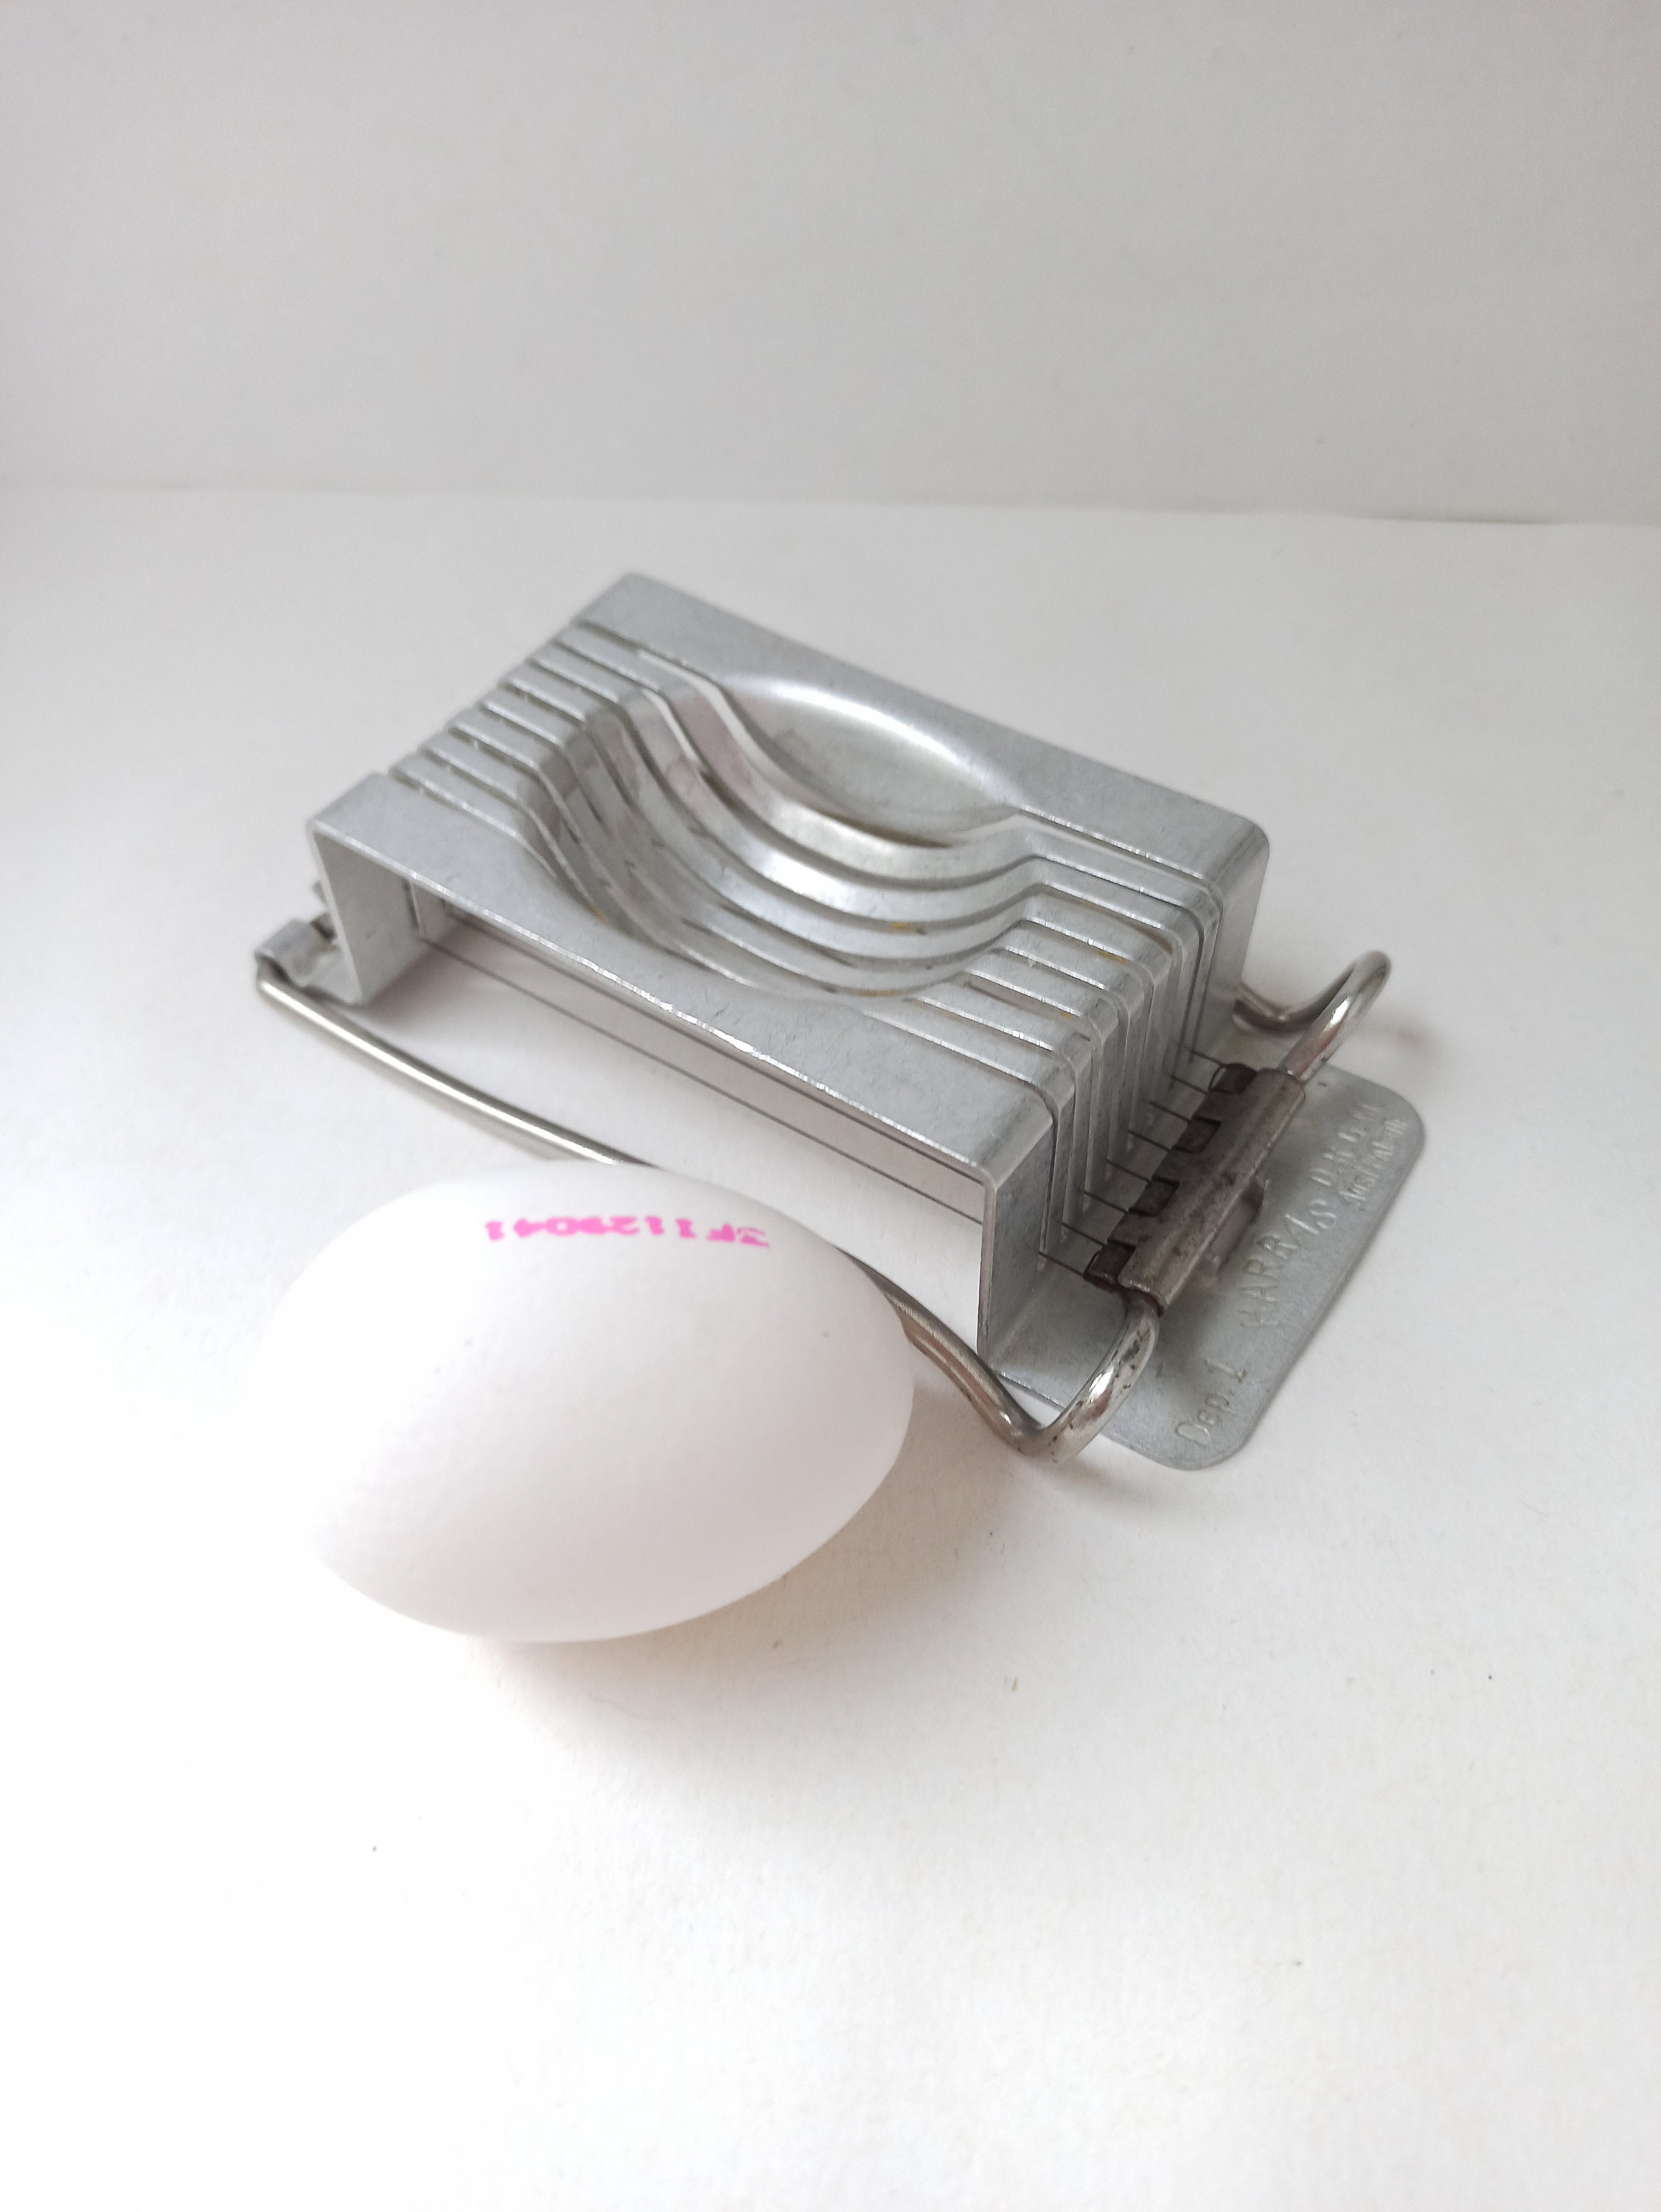 Vintage 1950s 1960s Aluminum Hard Boiled Egg Cutter or Slicer Small Kitchen  Utensil Metal Decor Kitchen Small Wires Tool Hinged 